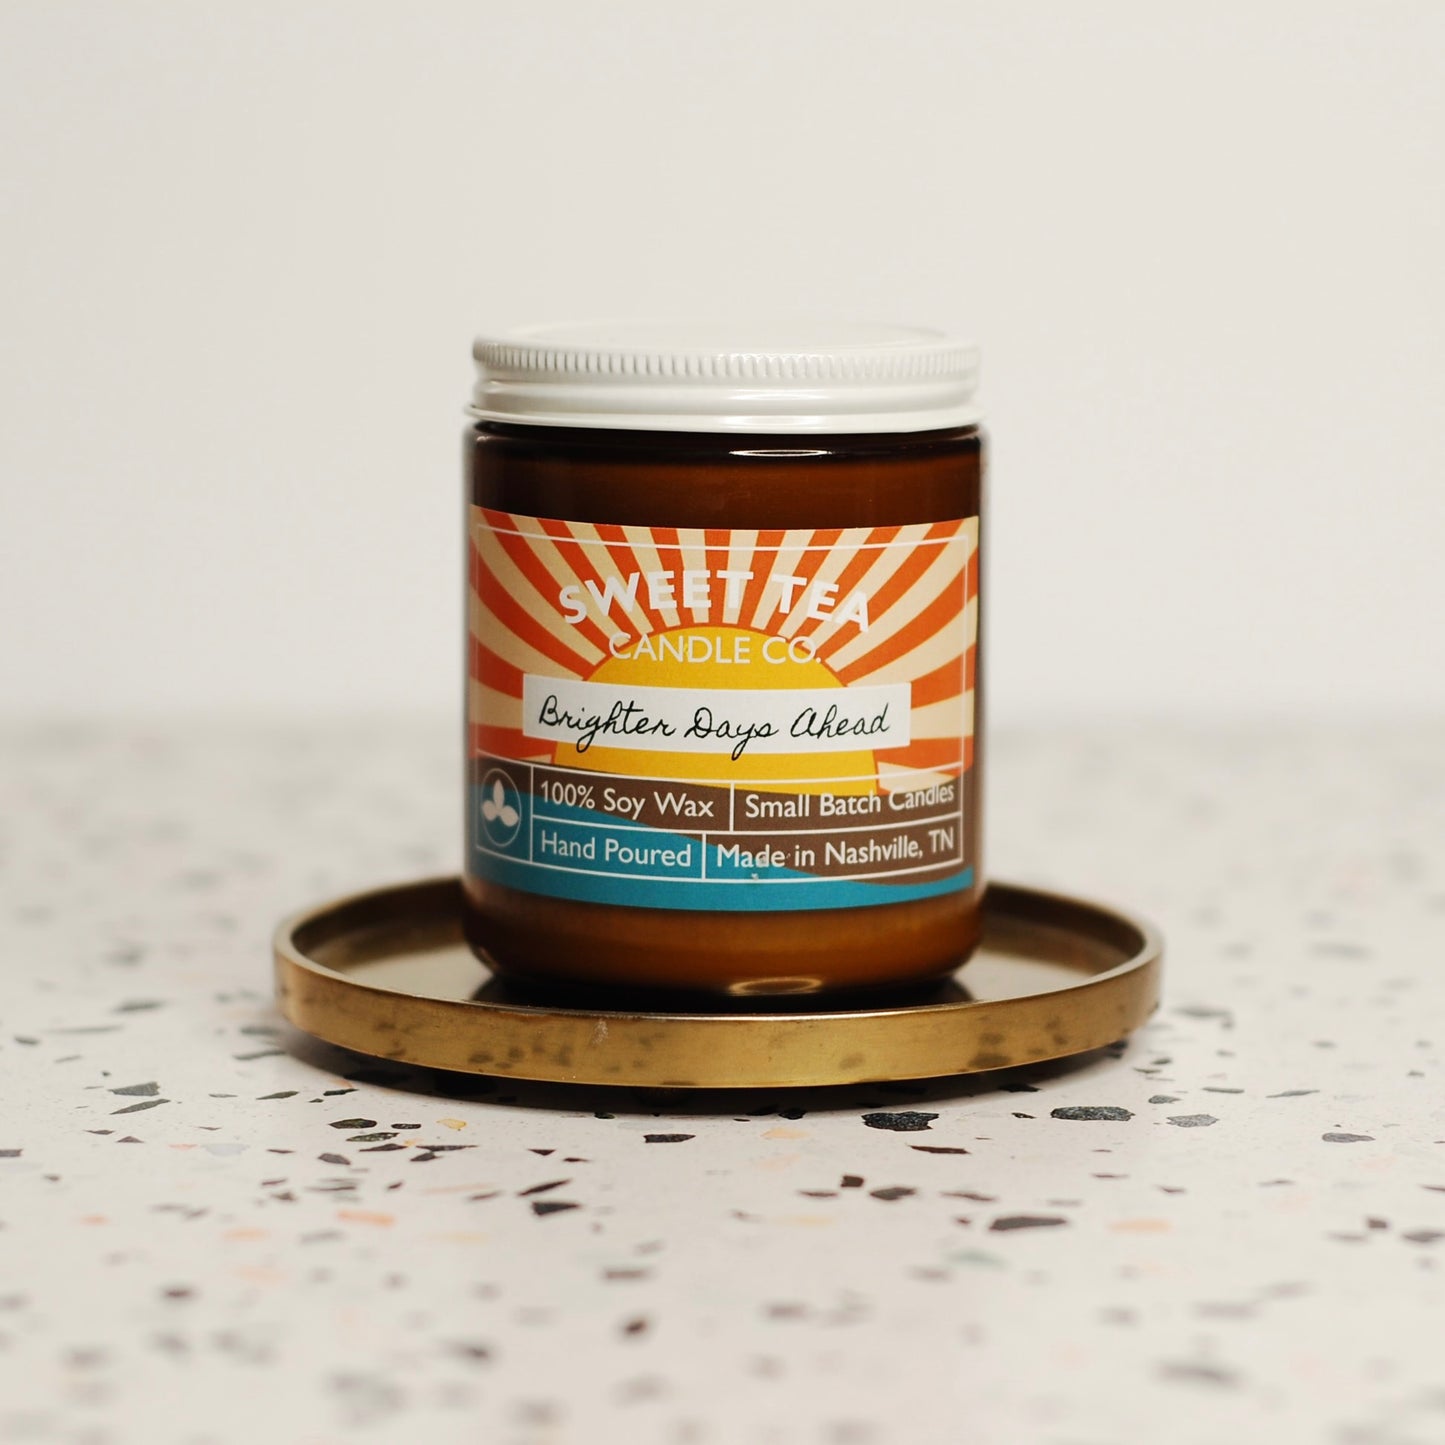 Brighter Days Ahead Candle